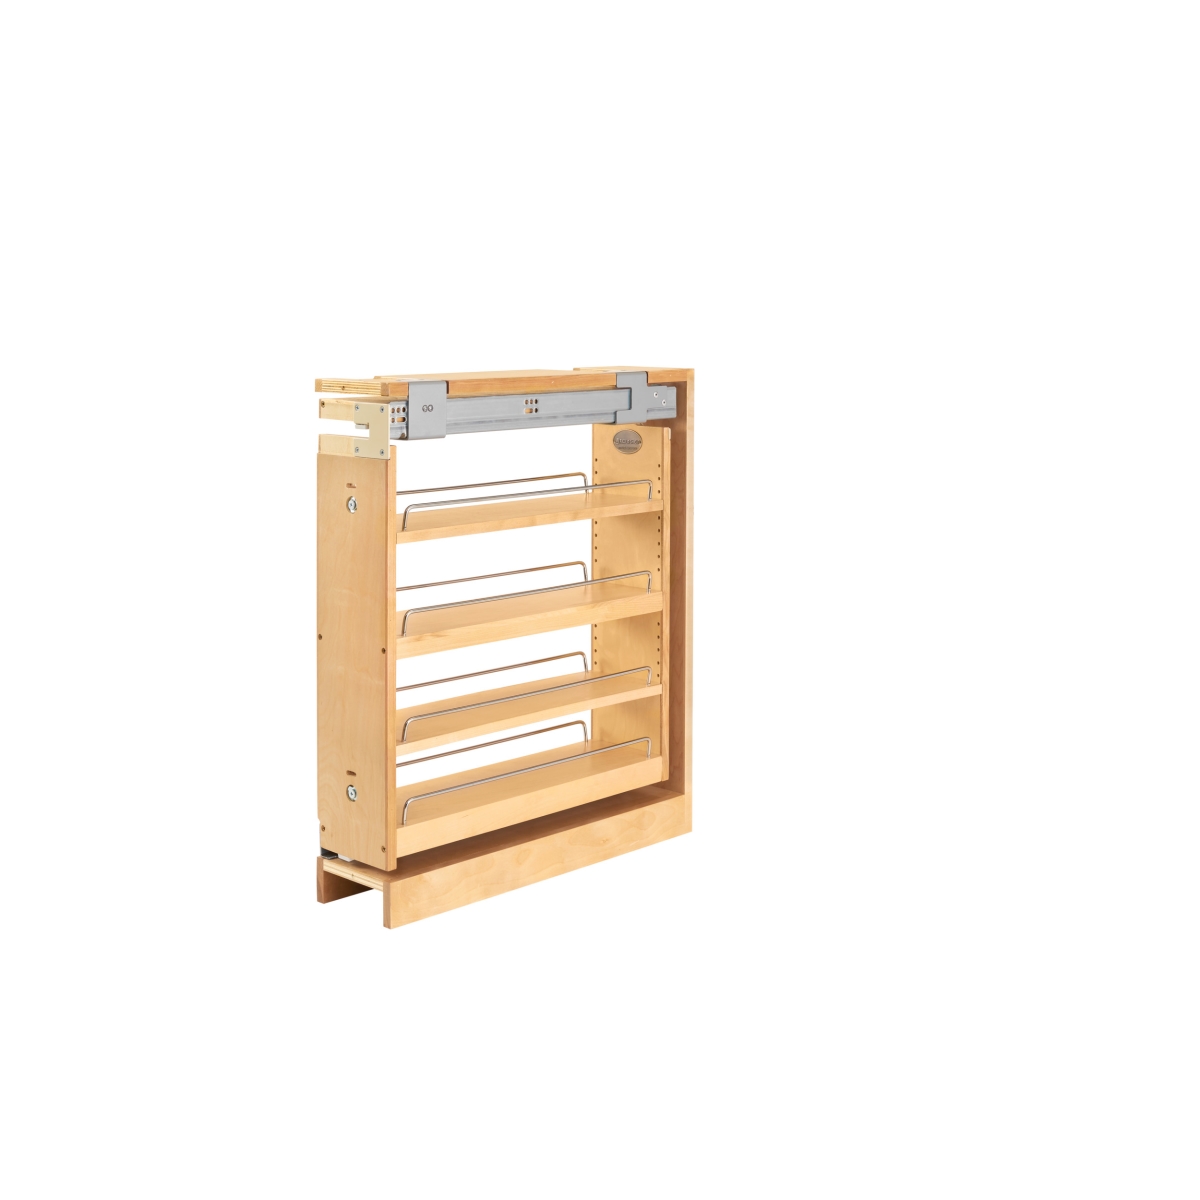 Rev A Shelf Rs438.bcsc.6c Base Cabinet Pullout Organizer With Top Slide Sink & Base Accessories, Natural Maple - 27.31 X 6 X 23 In.